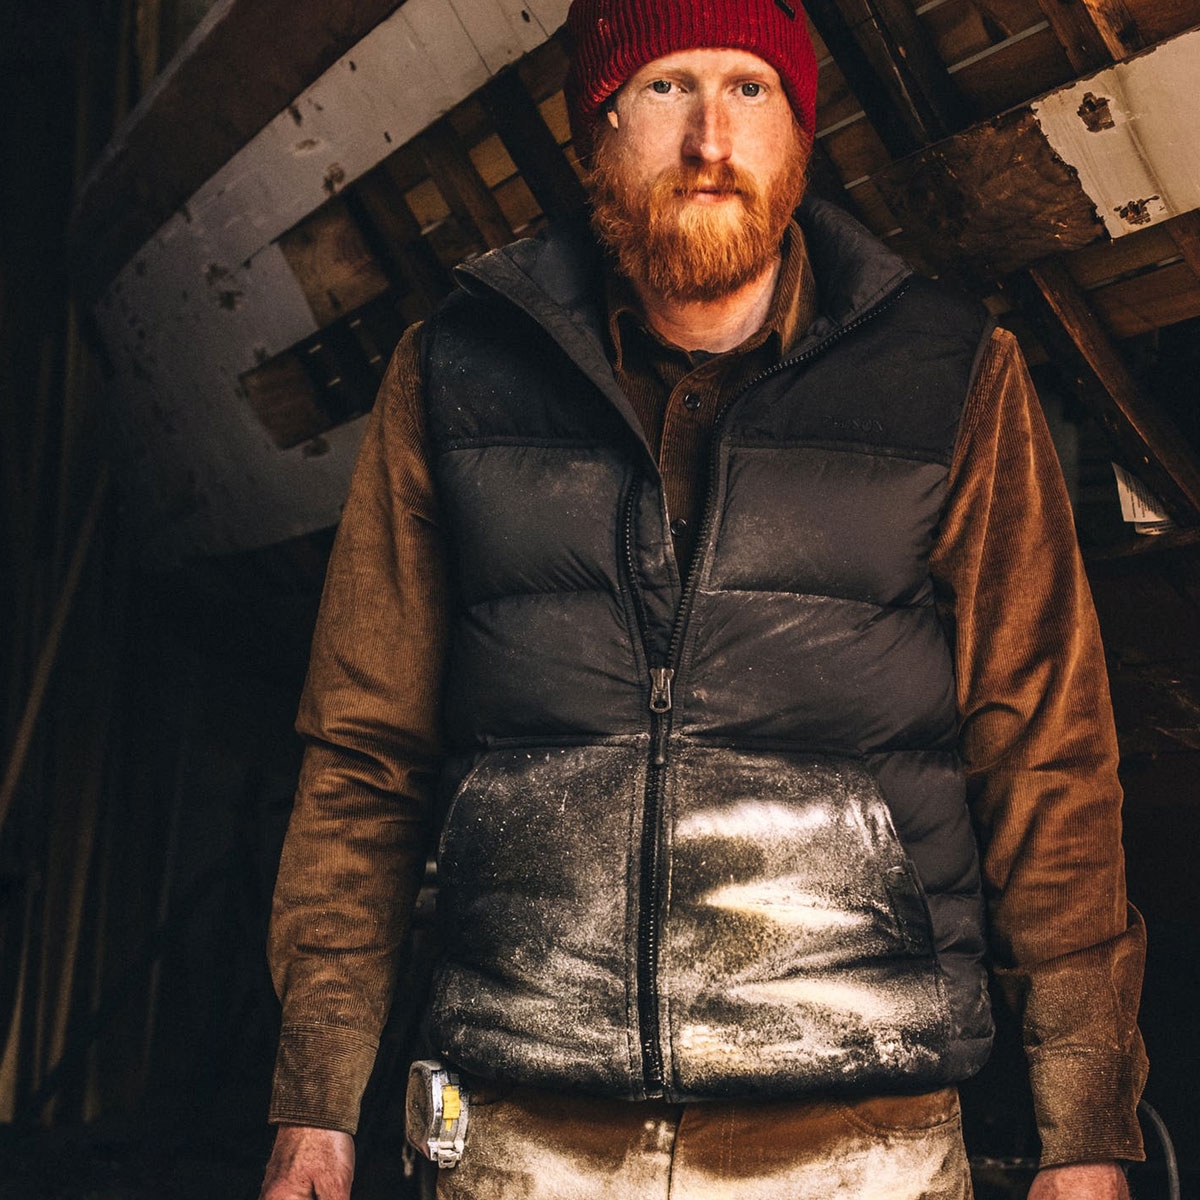 Filson Featherweight Down Vest, an exceptionally warm, light and packable goose-down vest